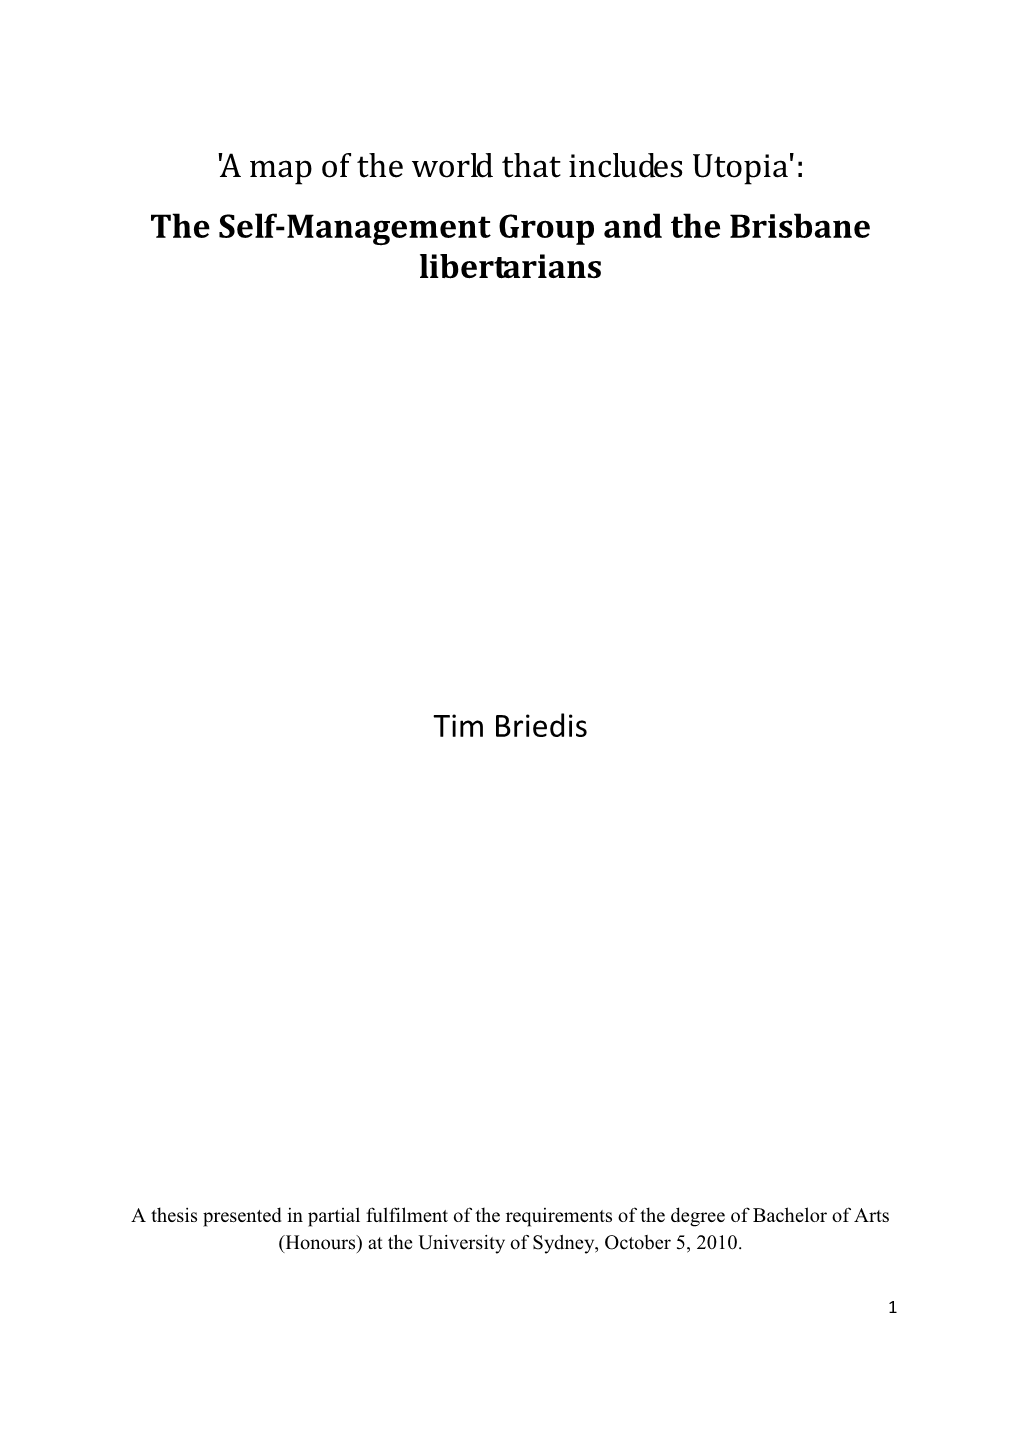 The Self-Management Group (SMG)